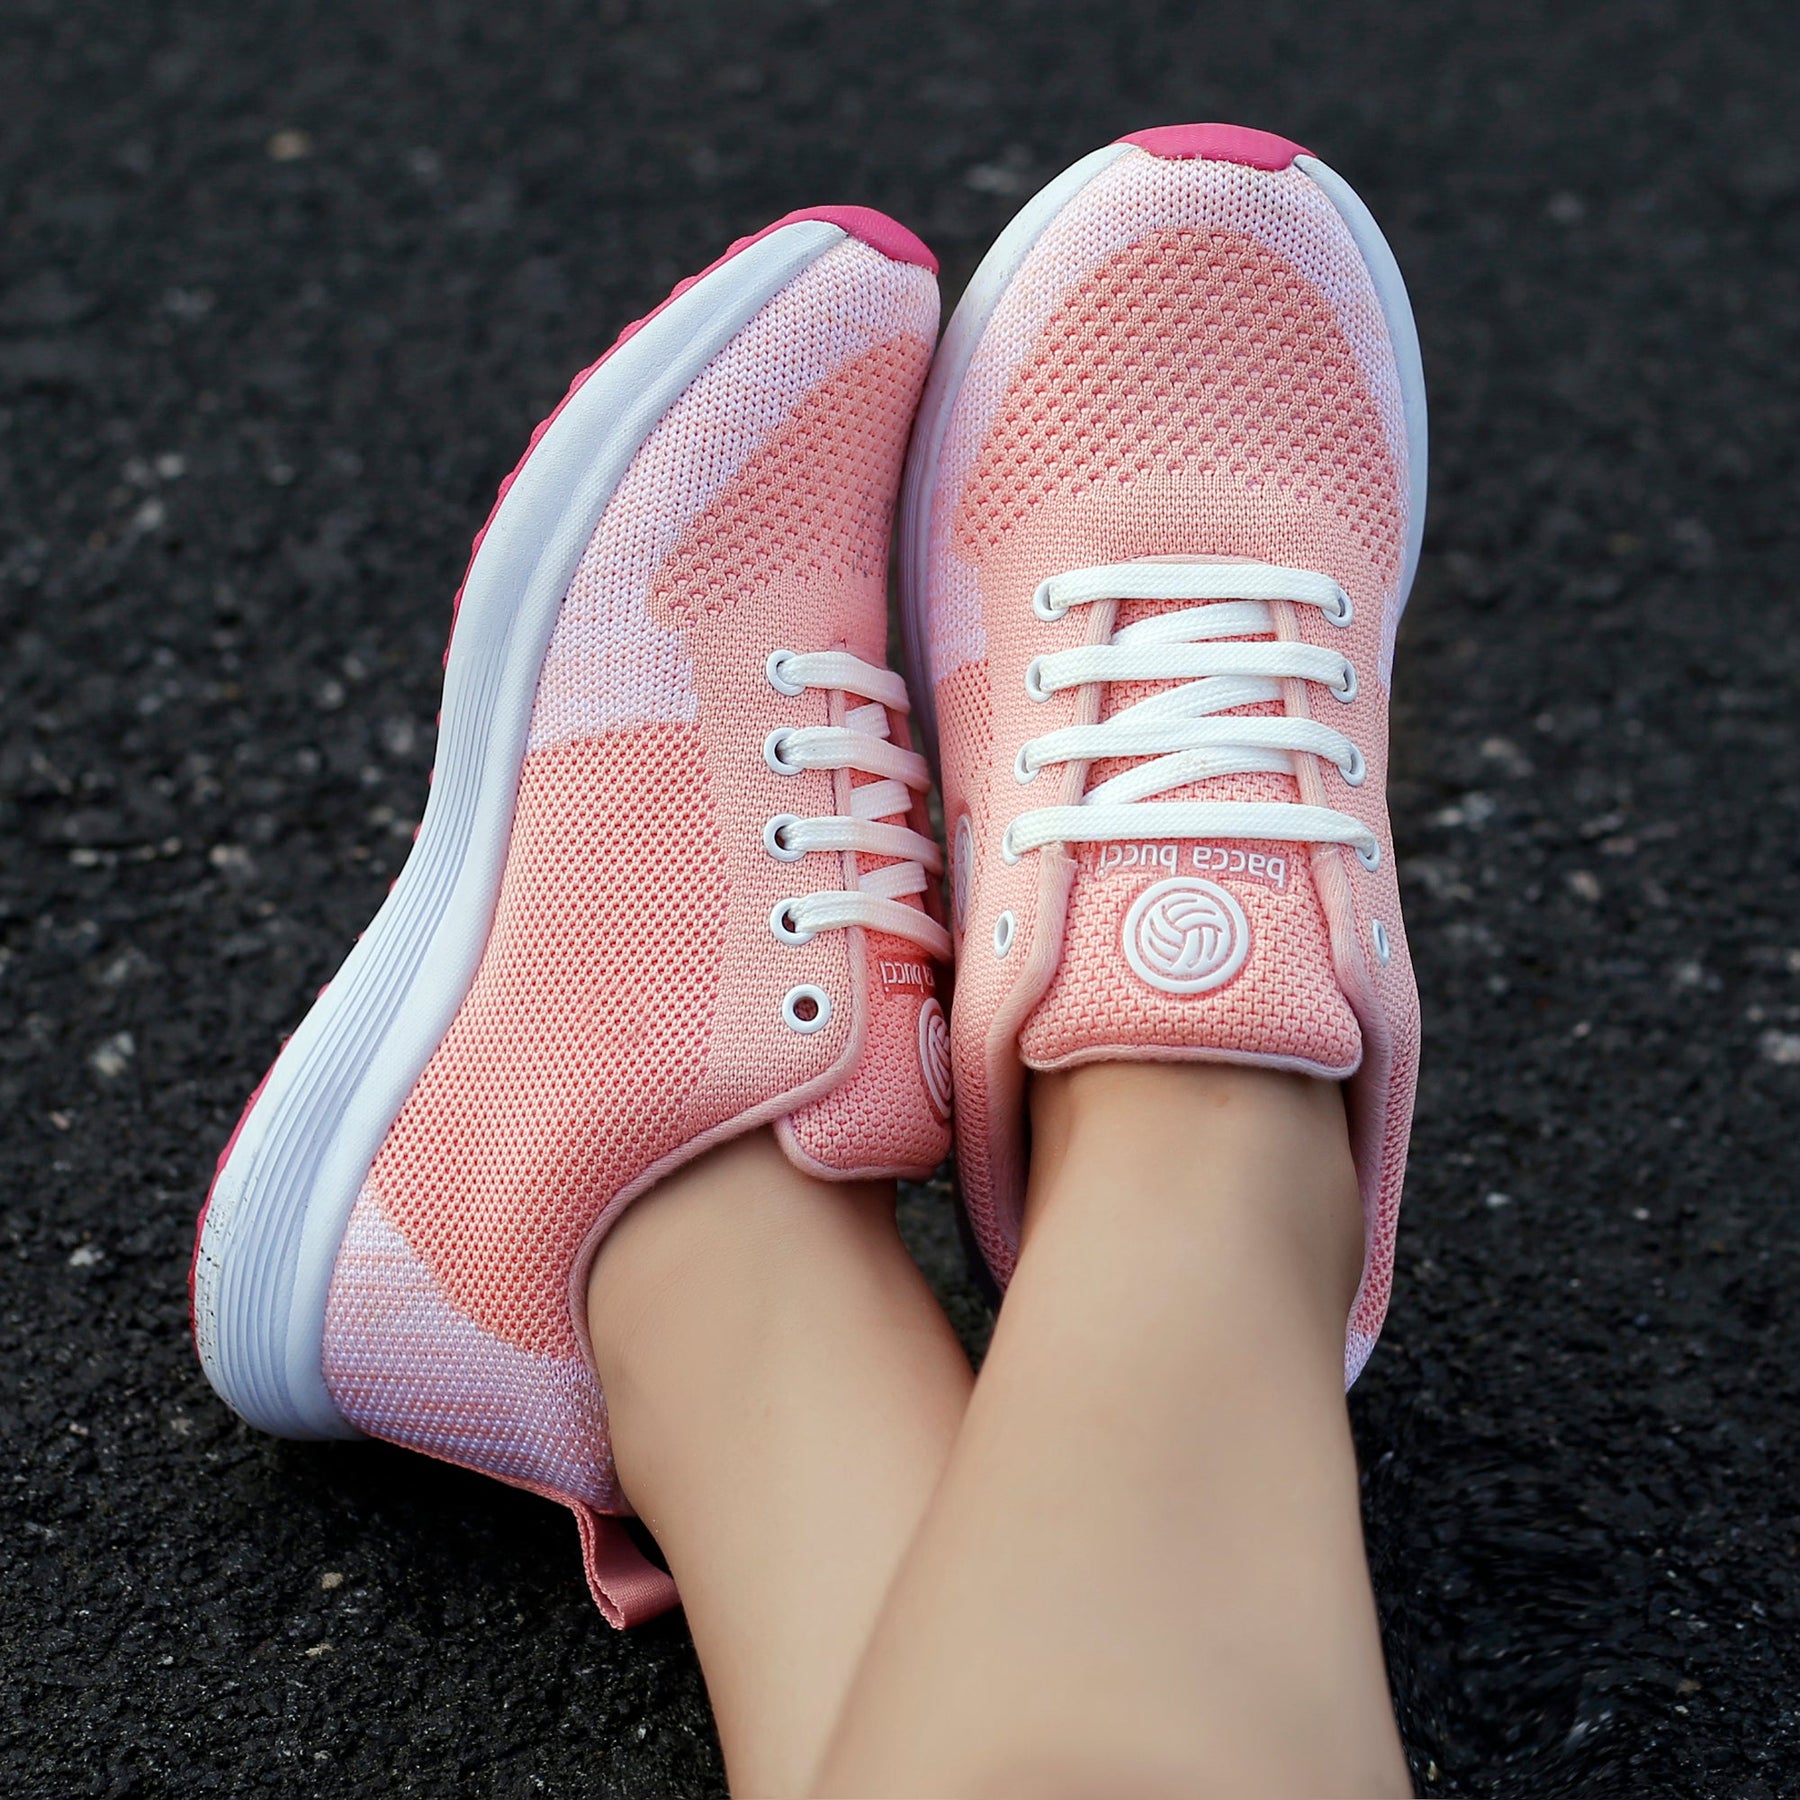 sneakers shoes for women, sneakers for women, casual shoes for women, orange shoes for women